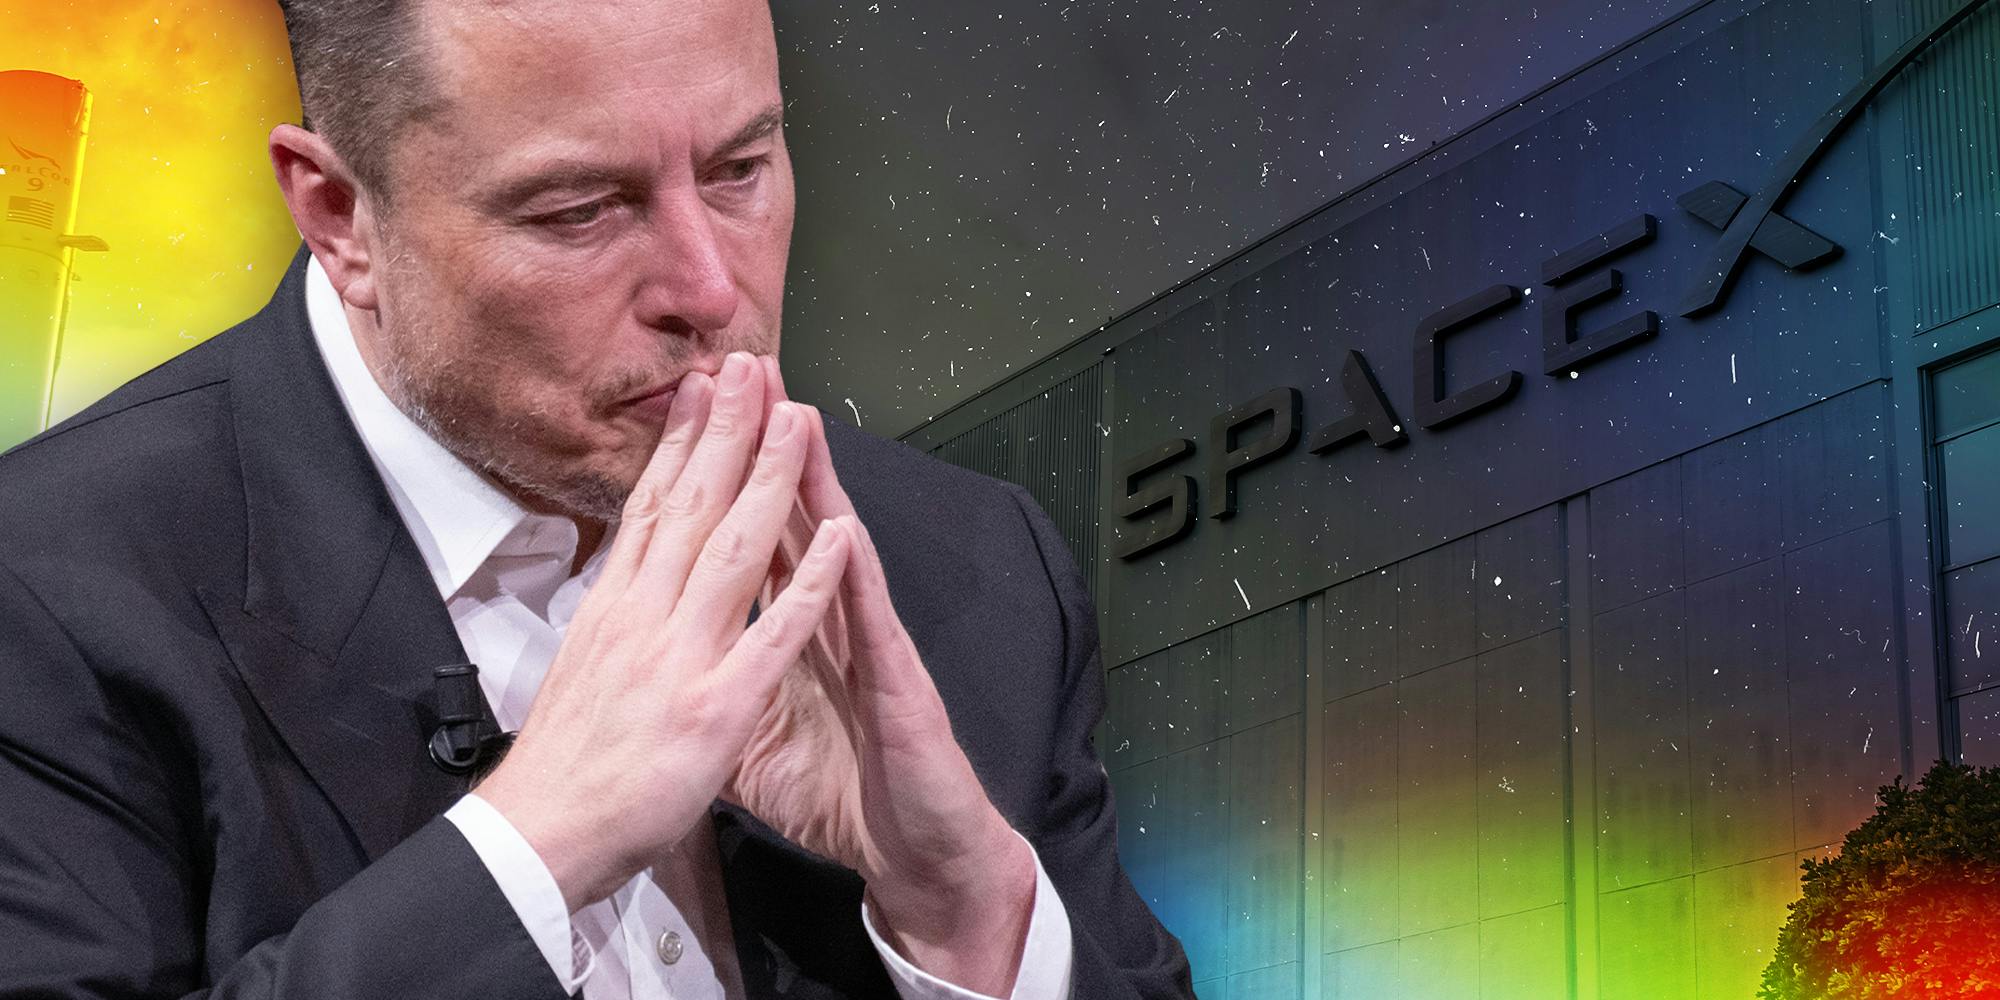 Tesla rejected a new anti-harassment policy days before Elon Musk sued for sexual harassment at SpaceX